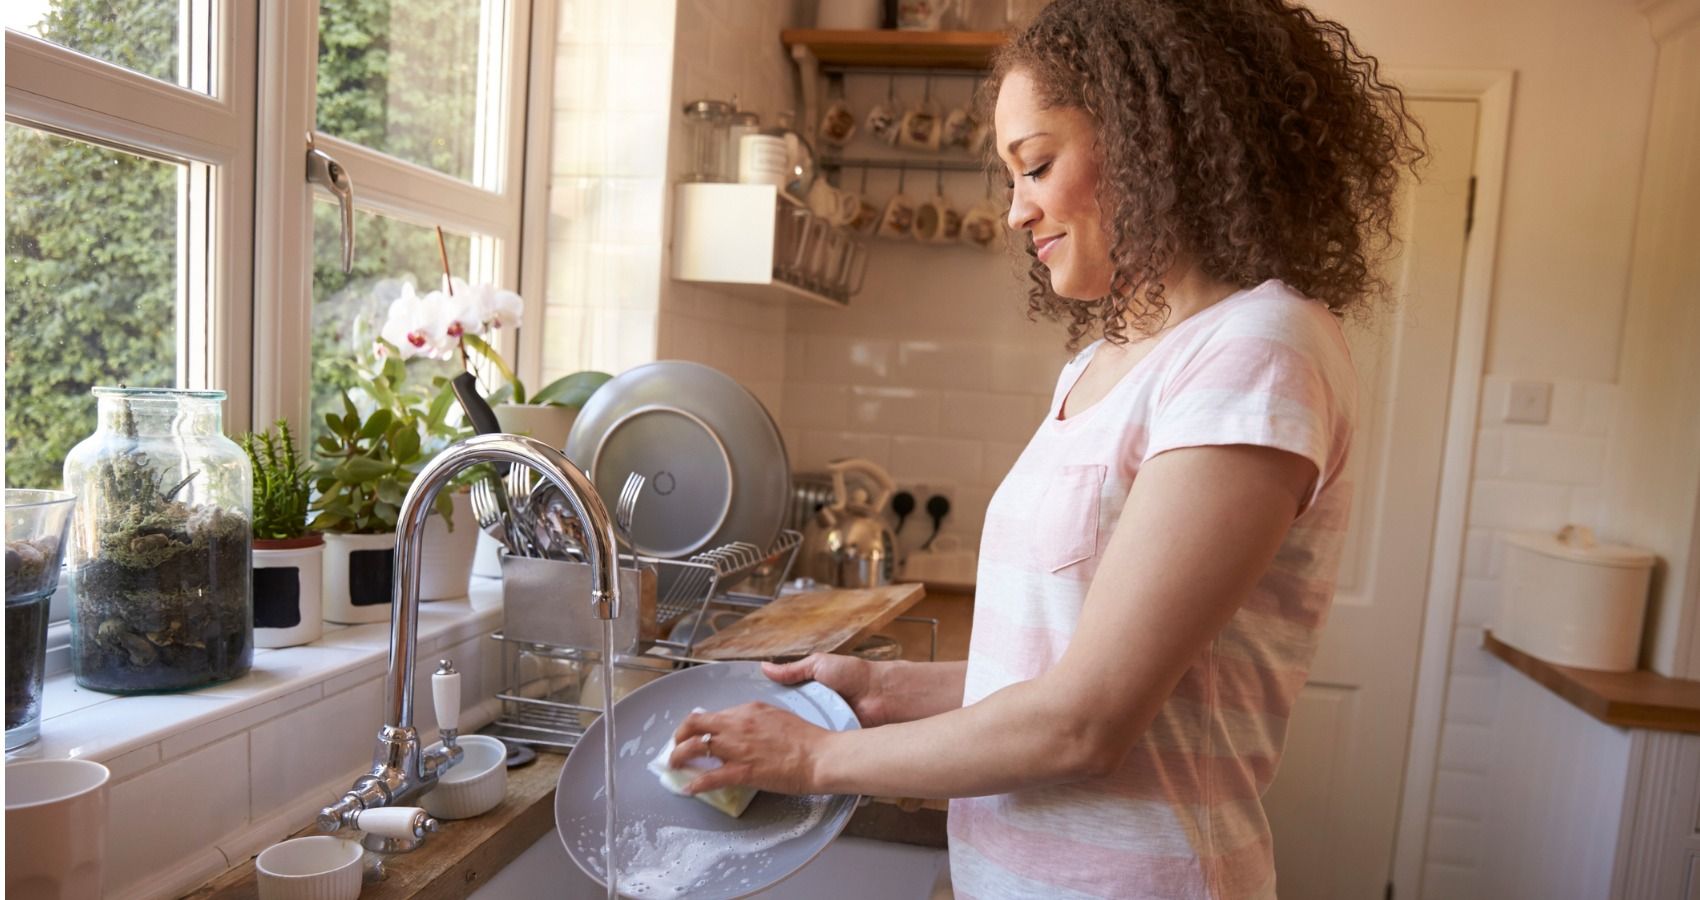 Washing Dishes Can Reduce Stress Science Says